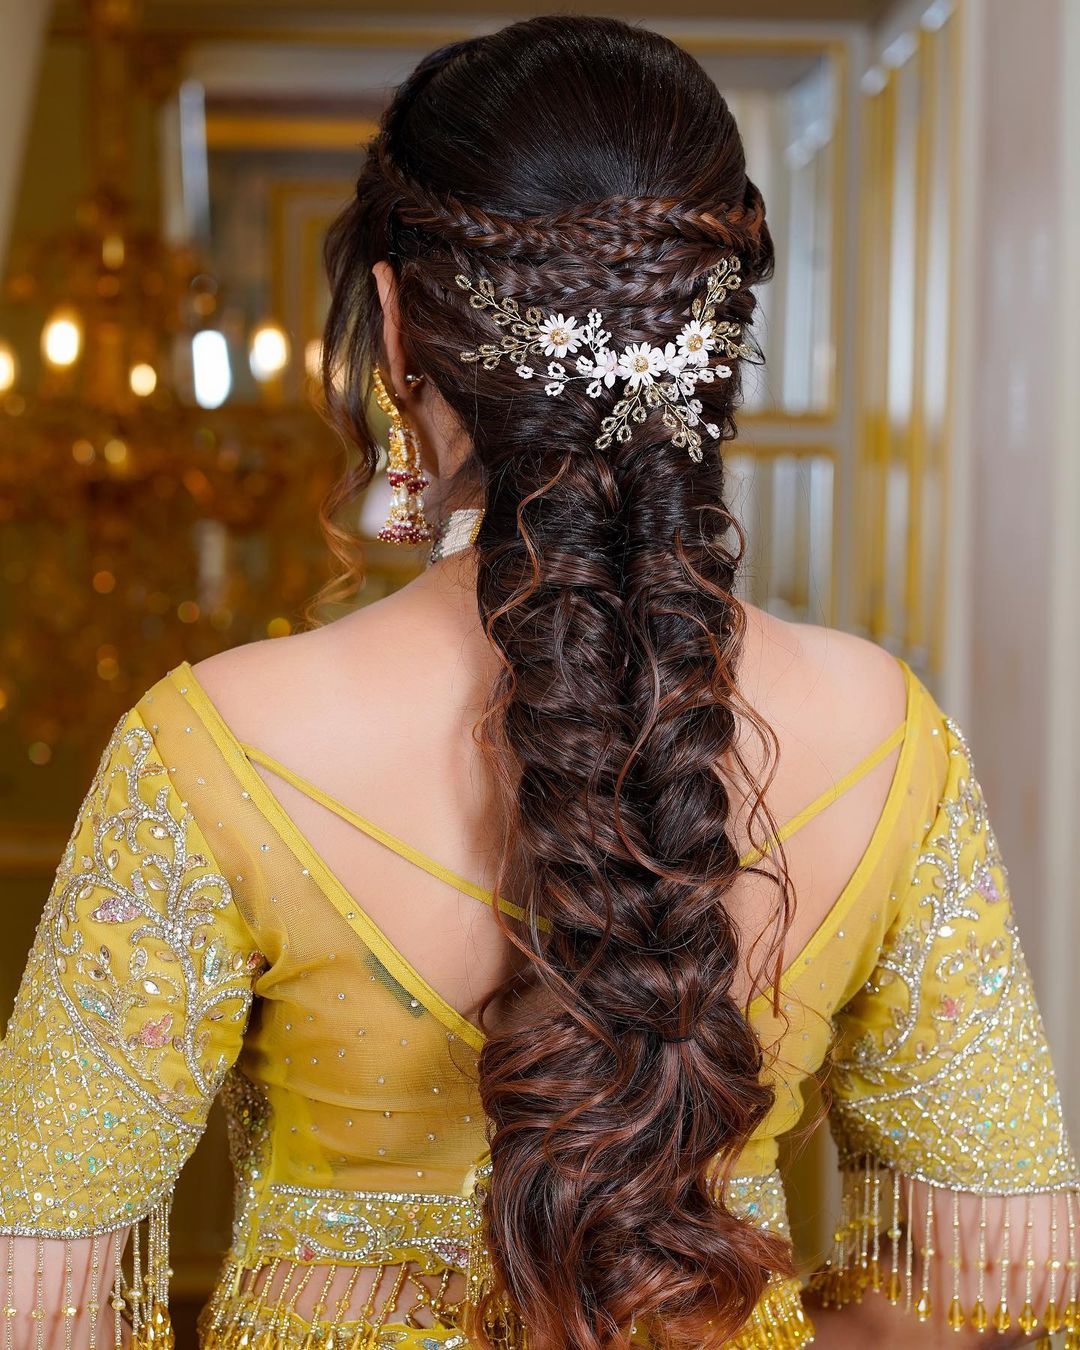 Shraddha Kapoor Bun Hairstyles To Try During The Festive And Wedding Season